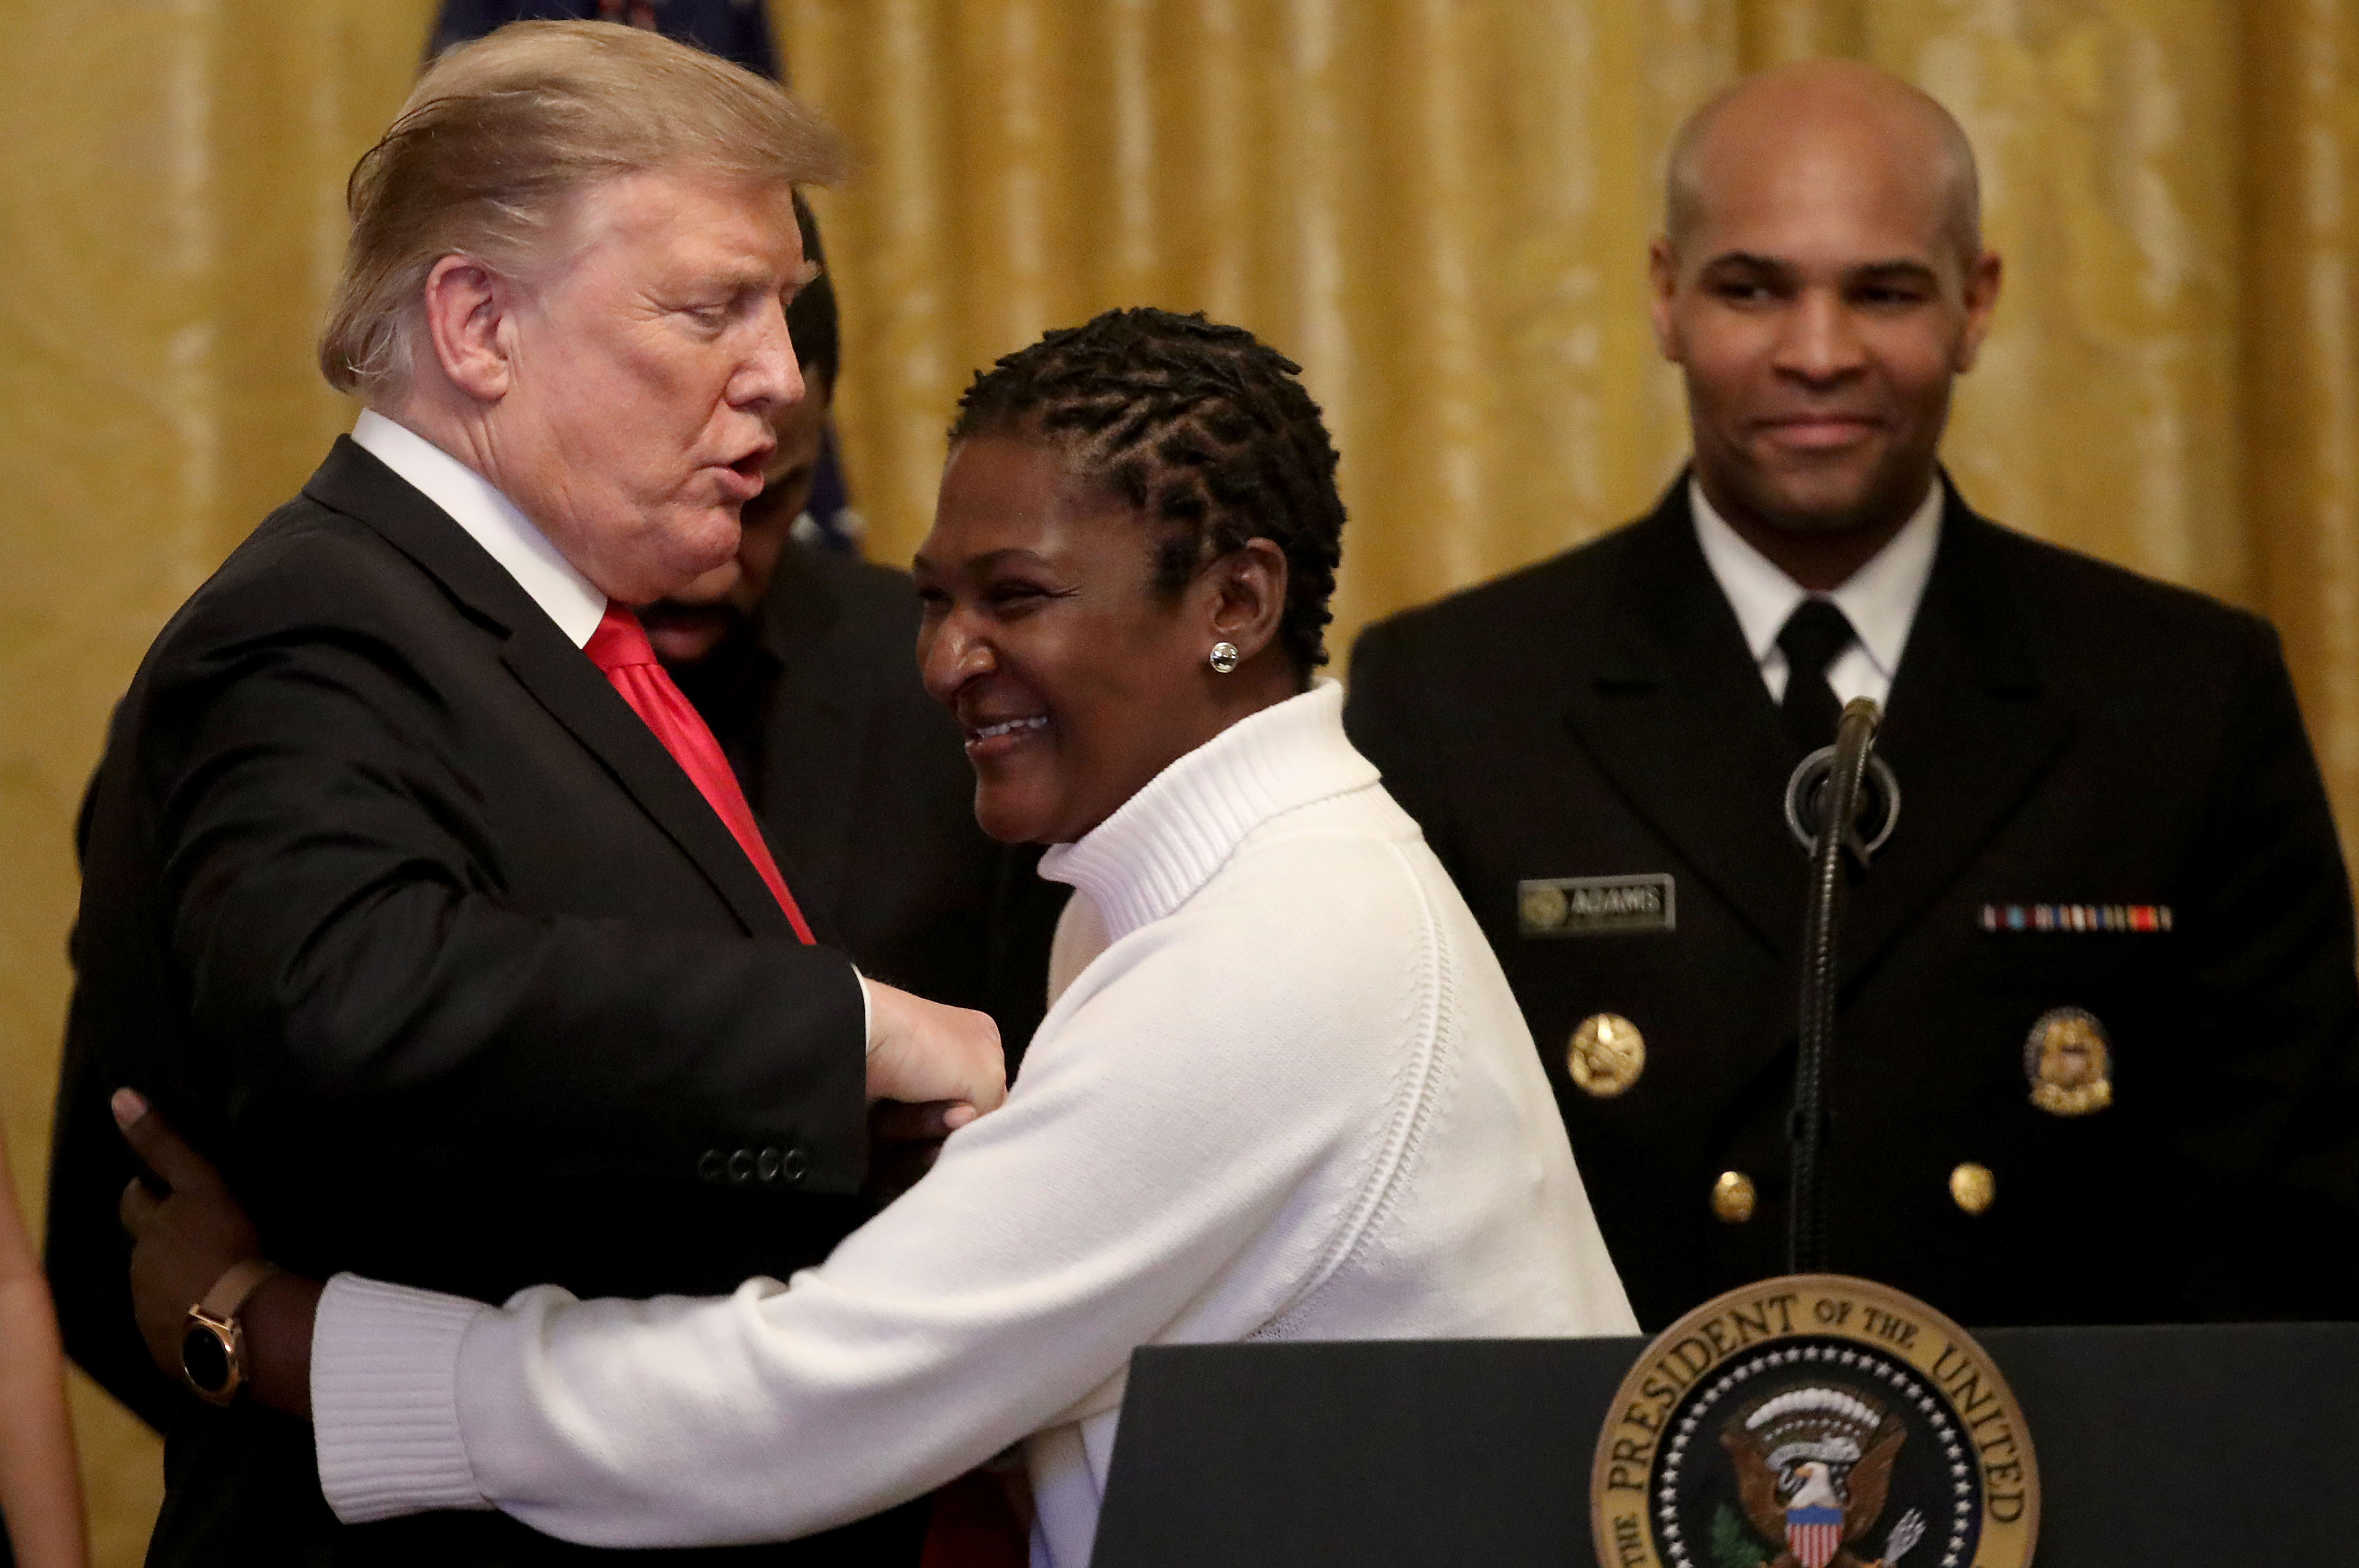 WASHINGTON, DC - FEBRUARY 21: U.S. President Donald Trump is hugged by Catherine Toney, a former inmate released following passage of the prison reform First Step Act, during a reception in the East Room of the White House February 21, 2019 in Washington, DC. The reception was held in honor of National African American History Month. (Photo by Win McNamee/Getty Images)